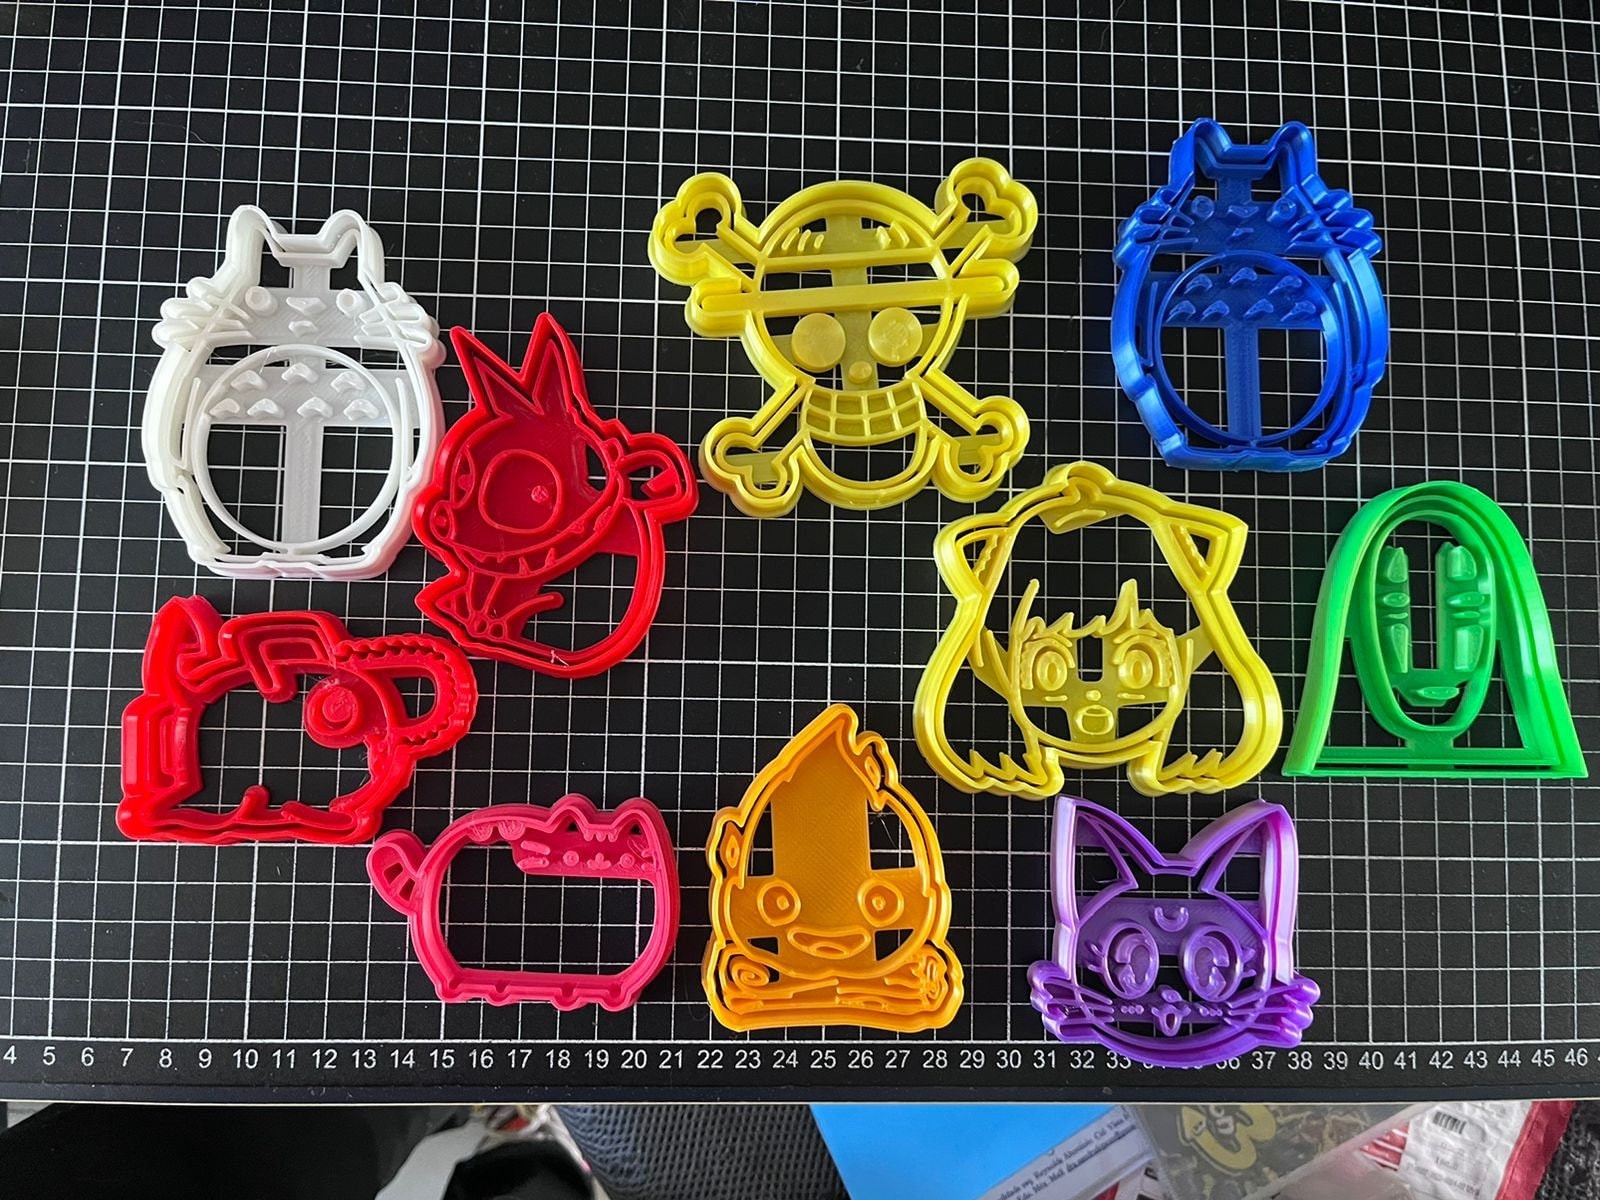 SHIYAO Anime Demon Slayer Tool 3D Mould Baking Fondant Cookie Cutter  Biscuit Mold Press Plunger  Walmartcom